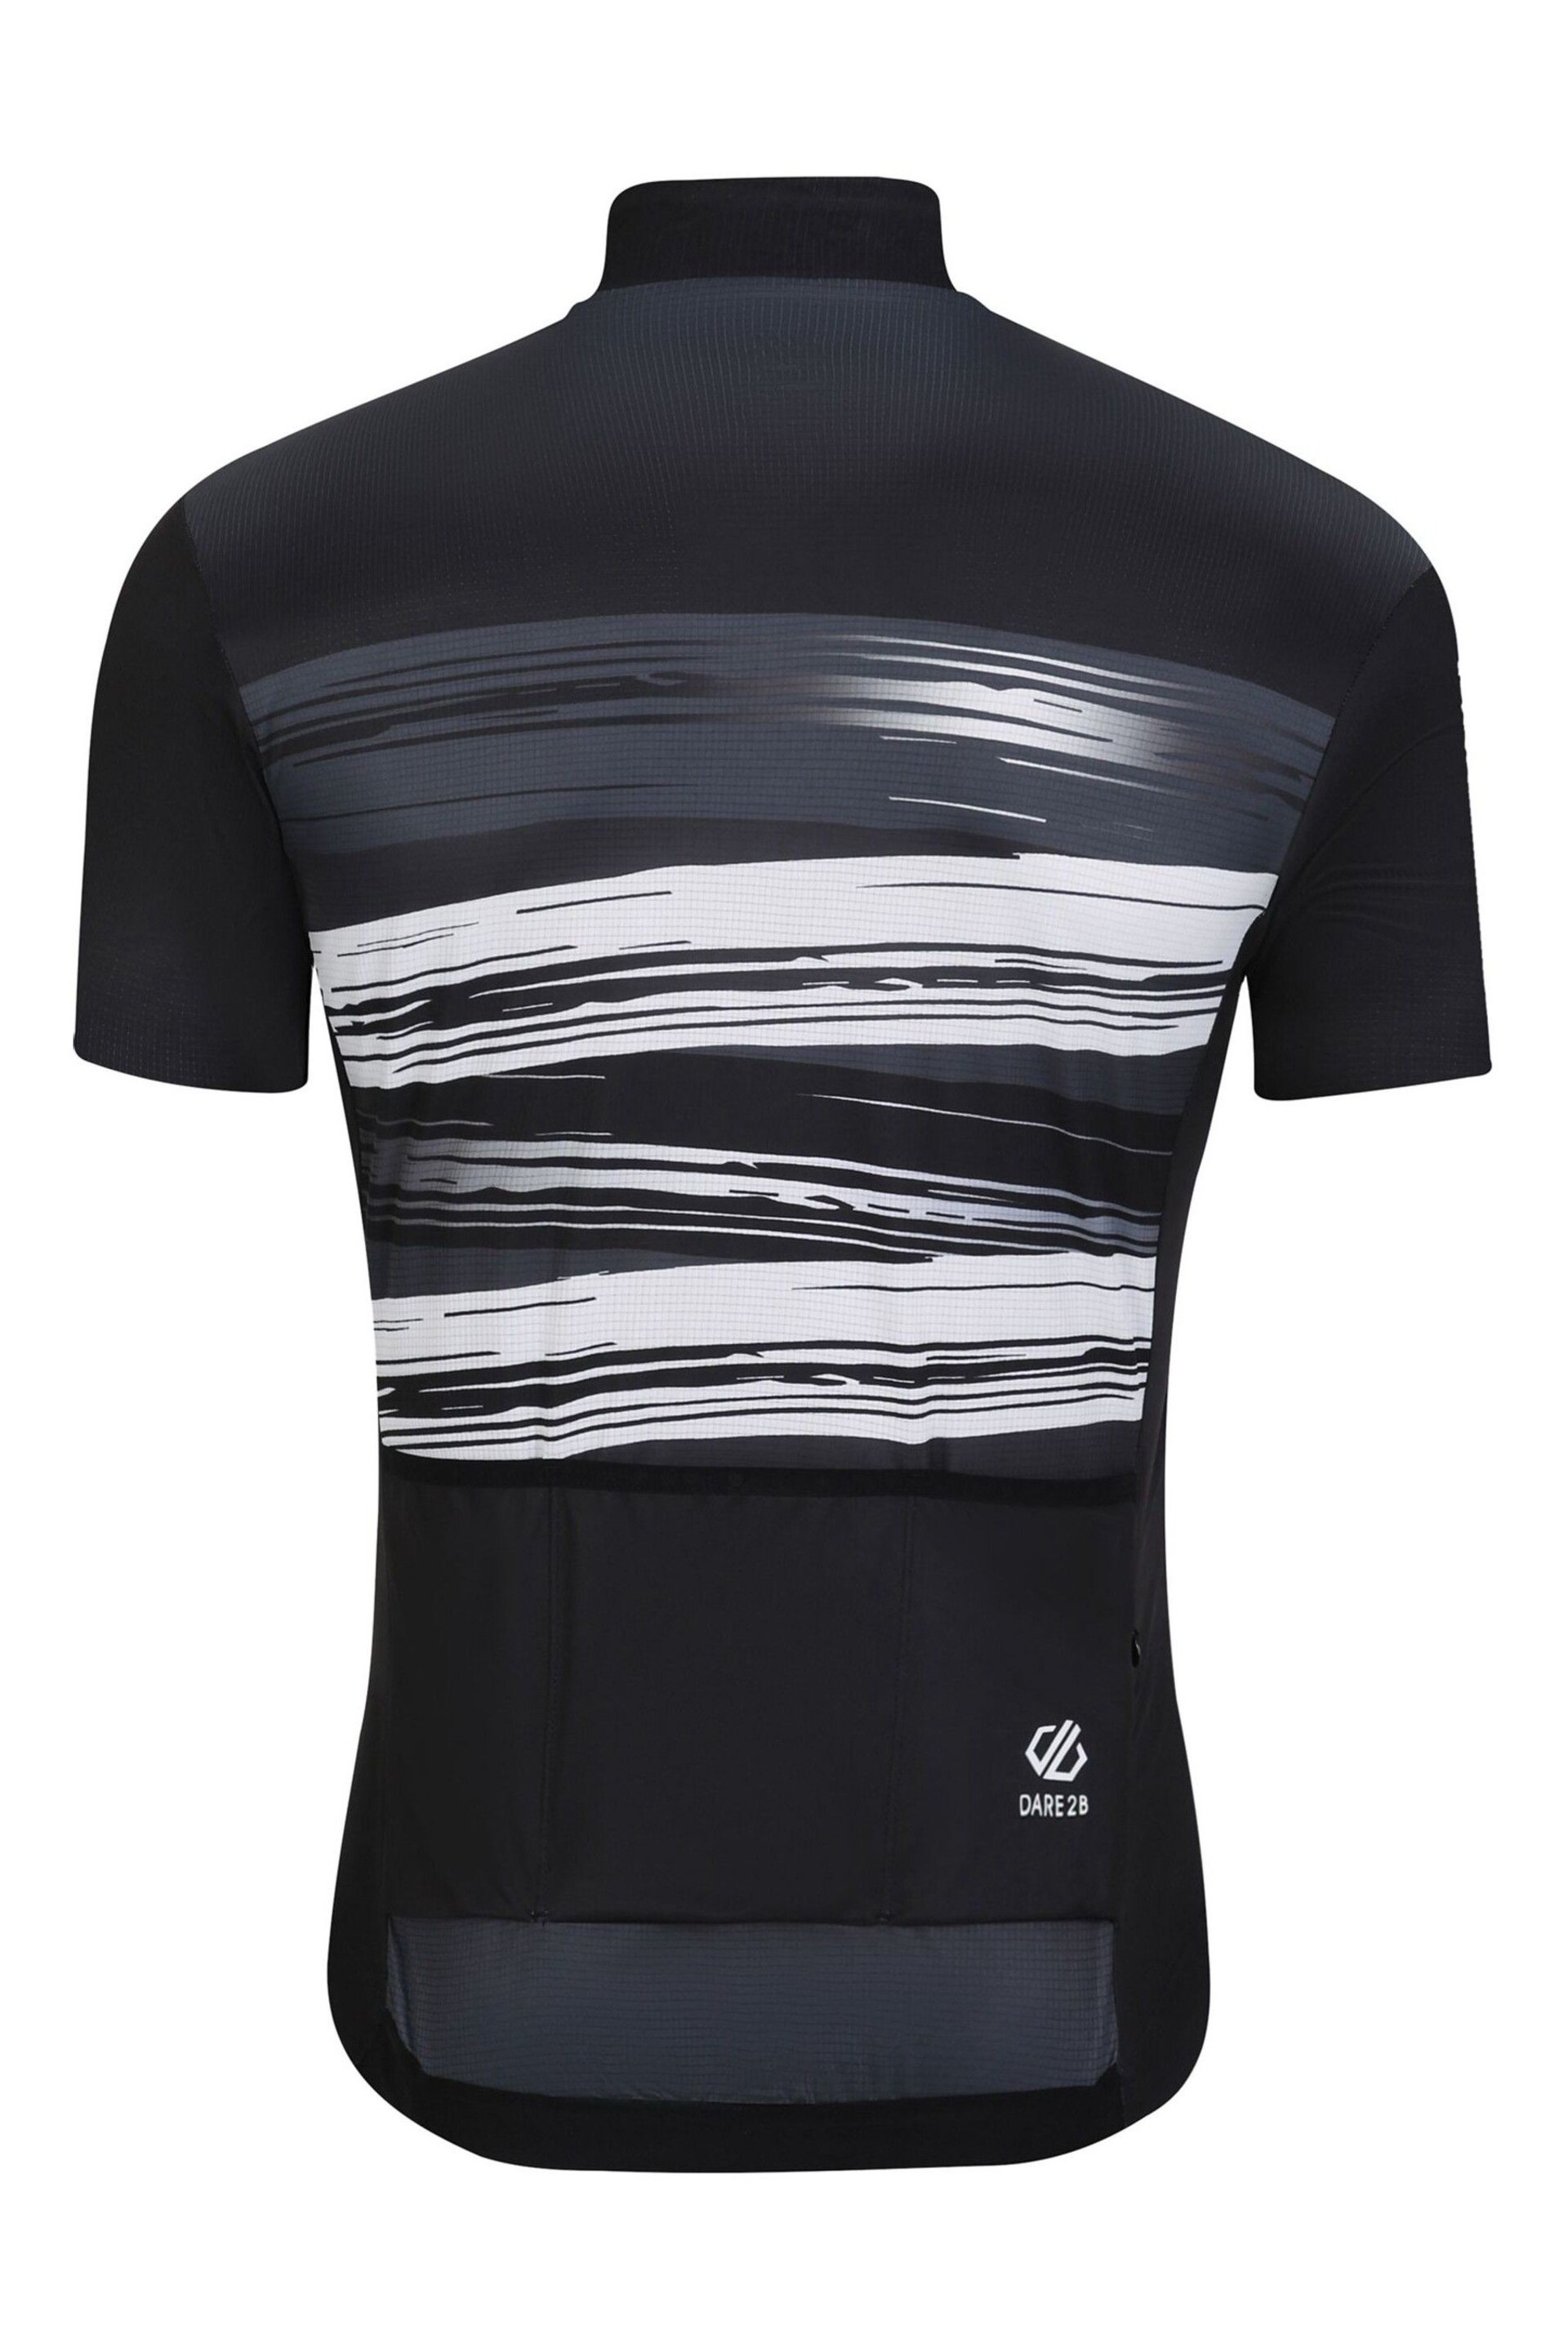 Dare 2b AEP Pedal Short Sleeve Cycling Jersey - Image 2 of 3